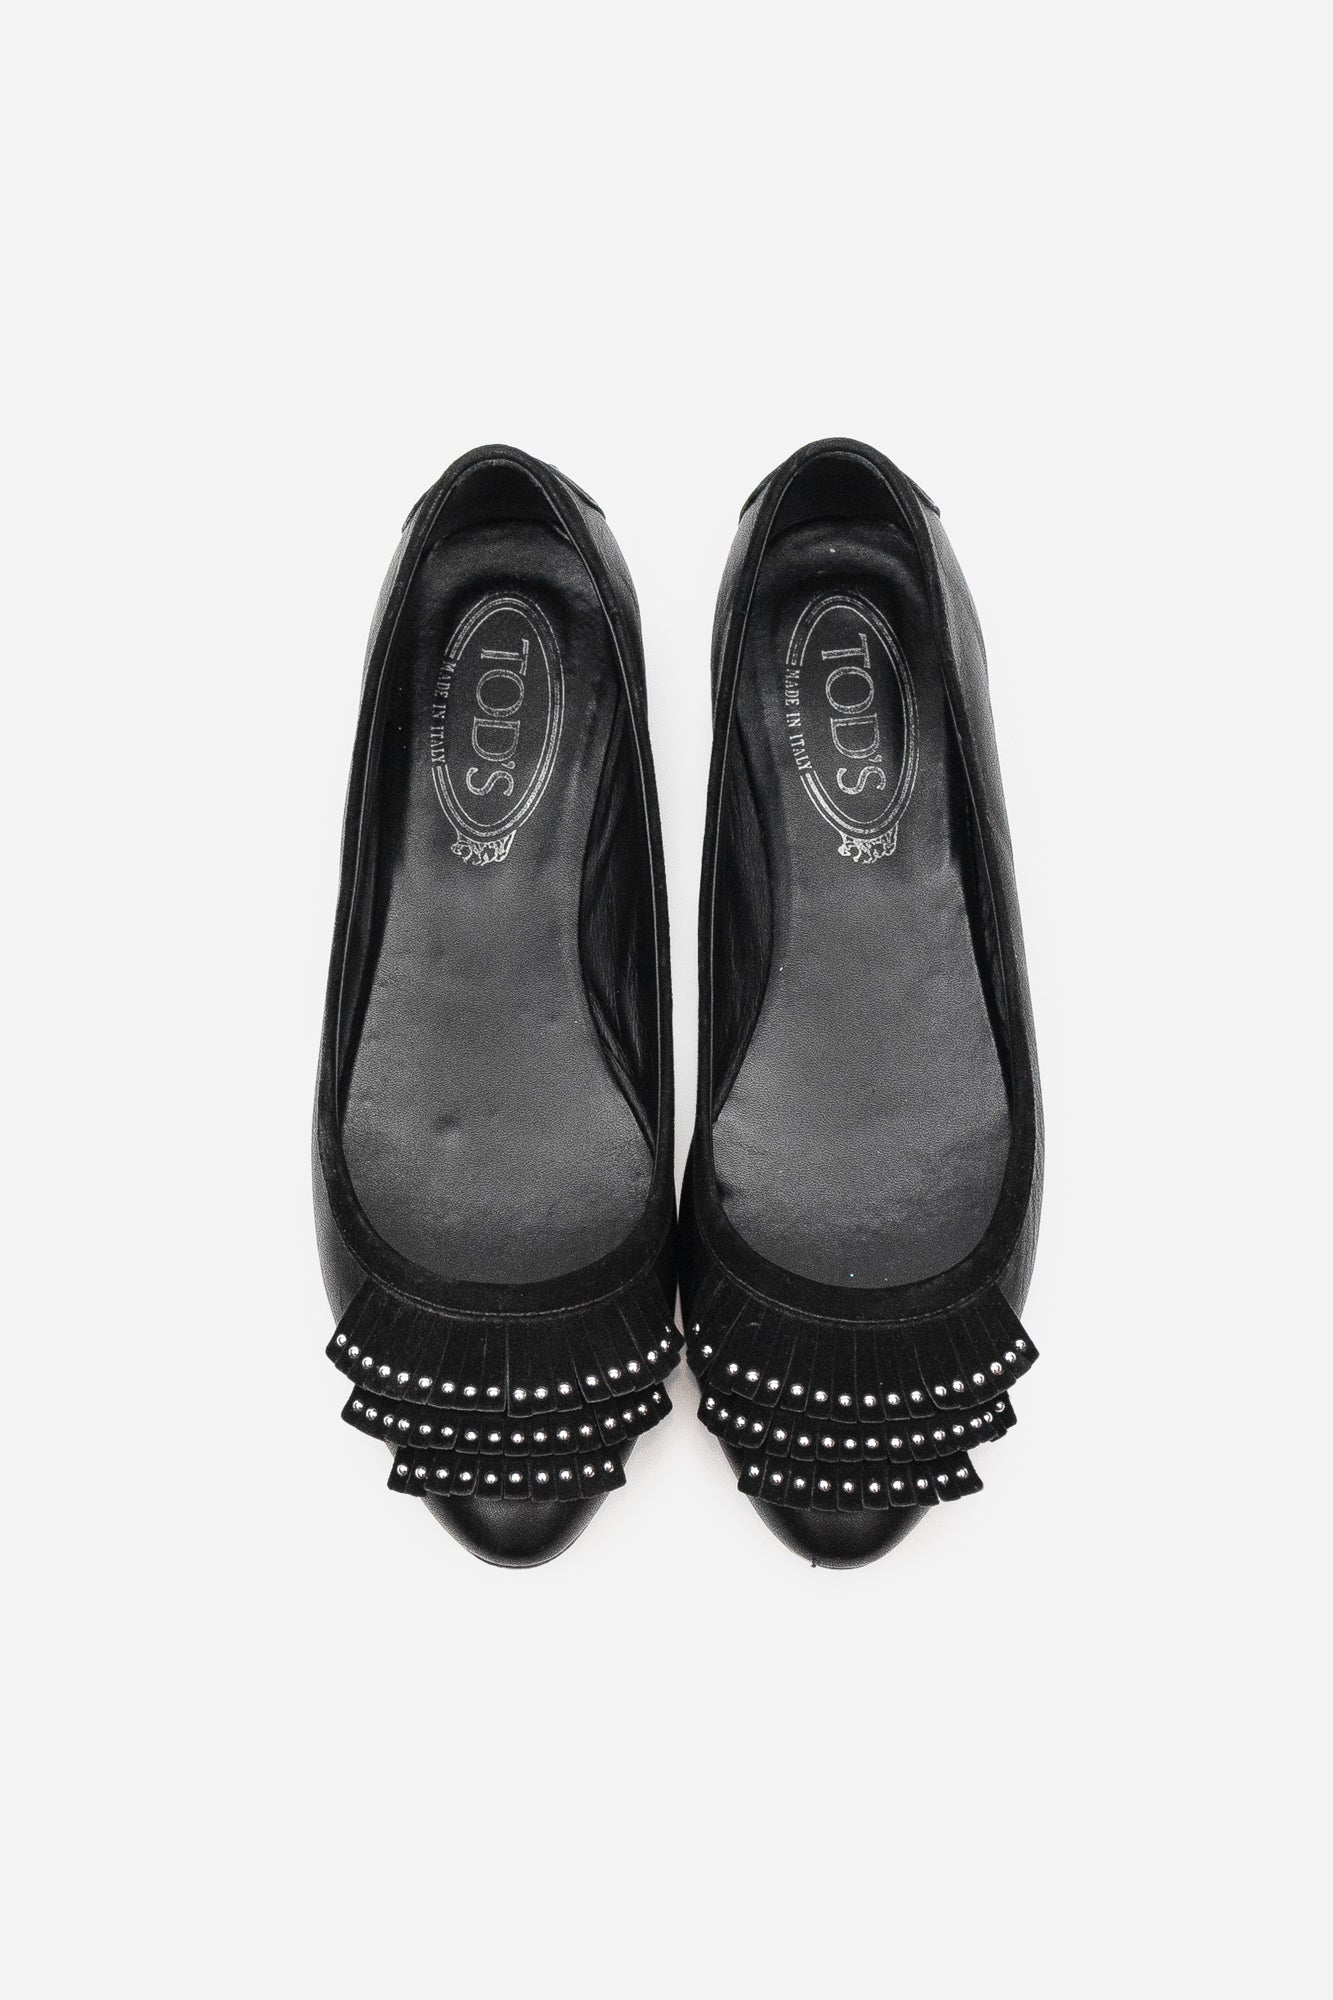 Black Suede Fringed Studded Flats - So Over It Luxury Consignment